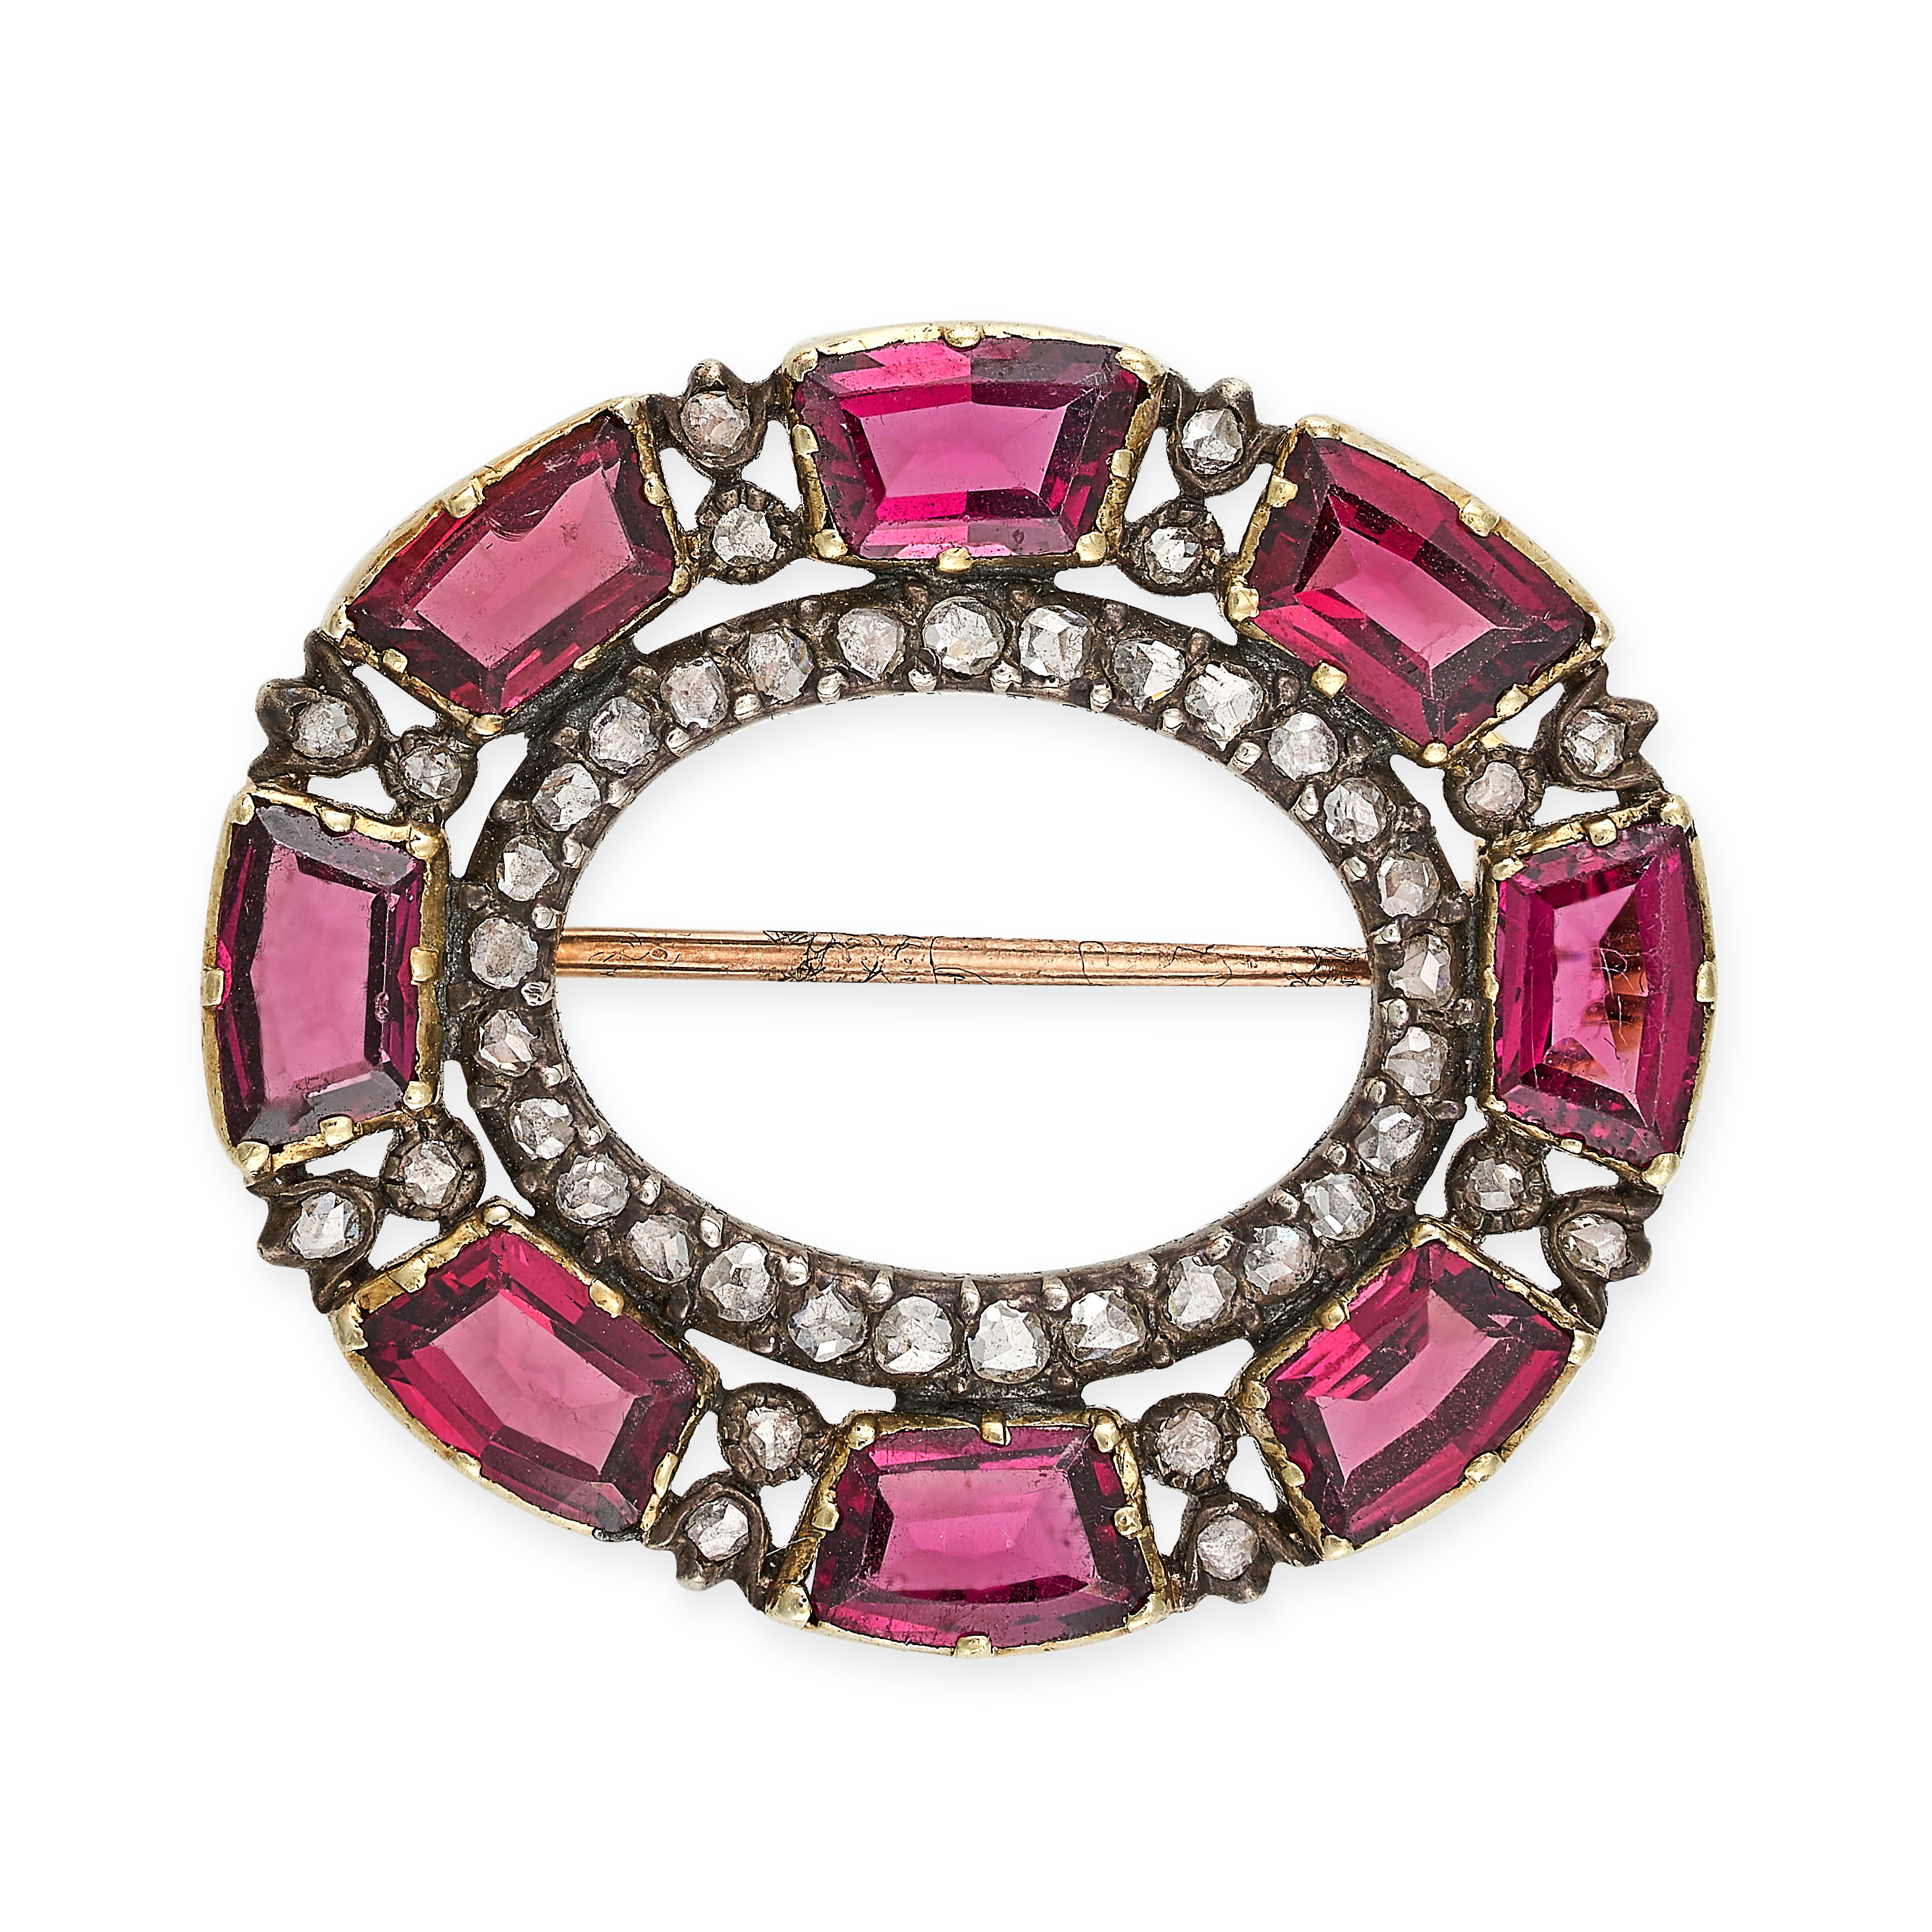 AN ANTIQUE GARNET AND DIAMOND BROOCH in yellow gold and silver, designed as an open oval set with...